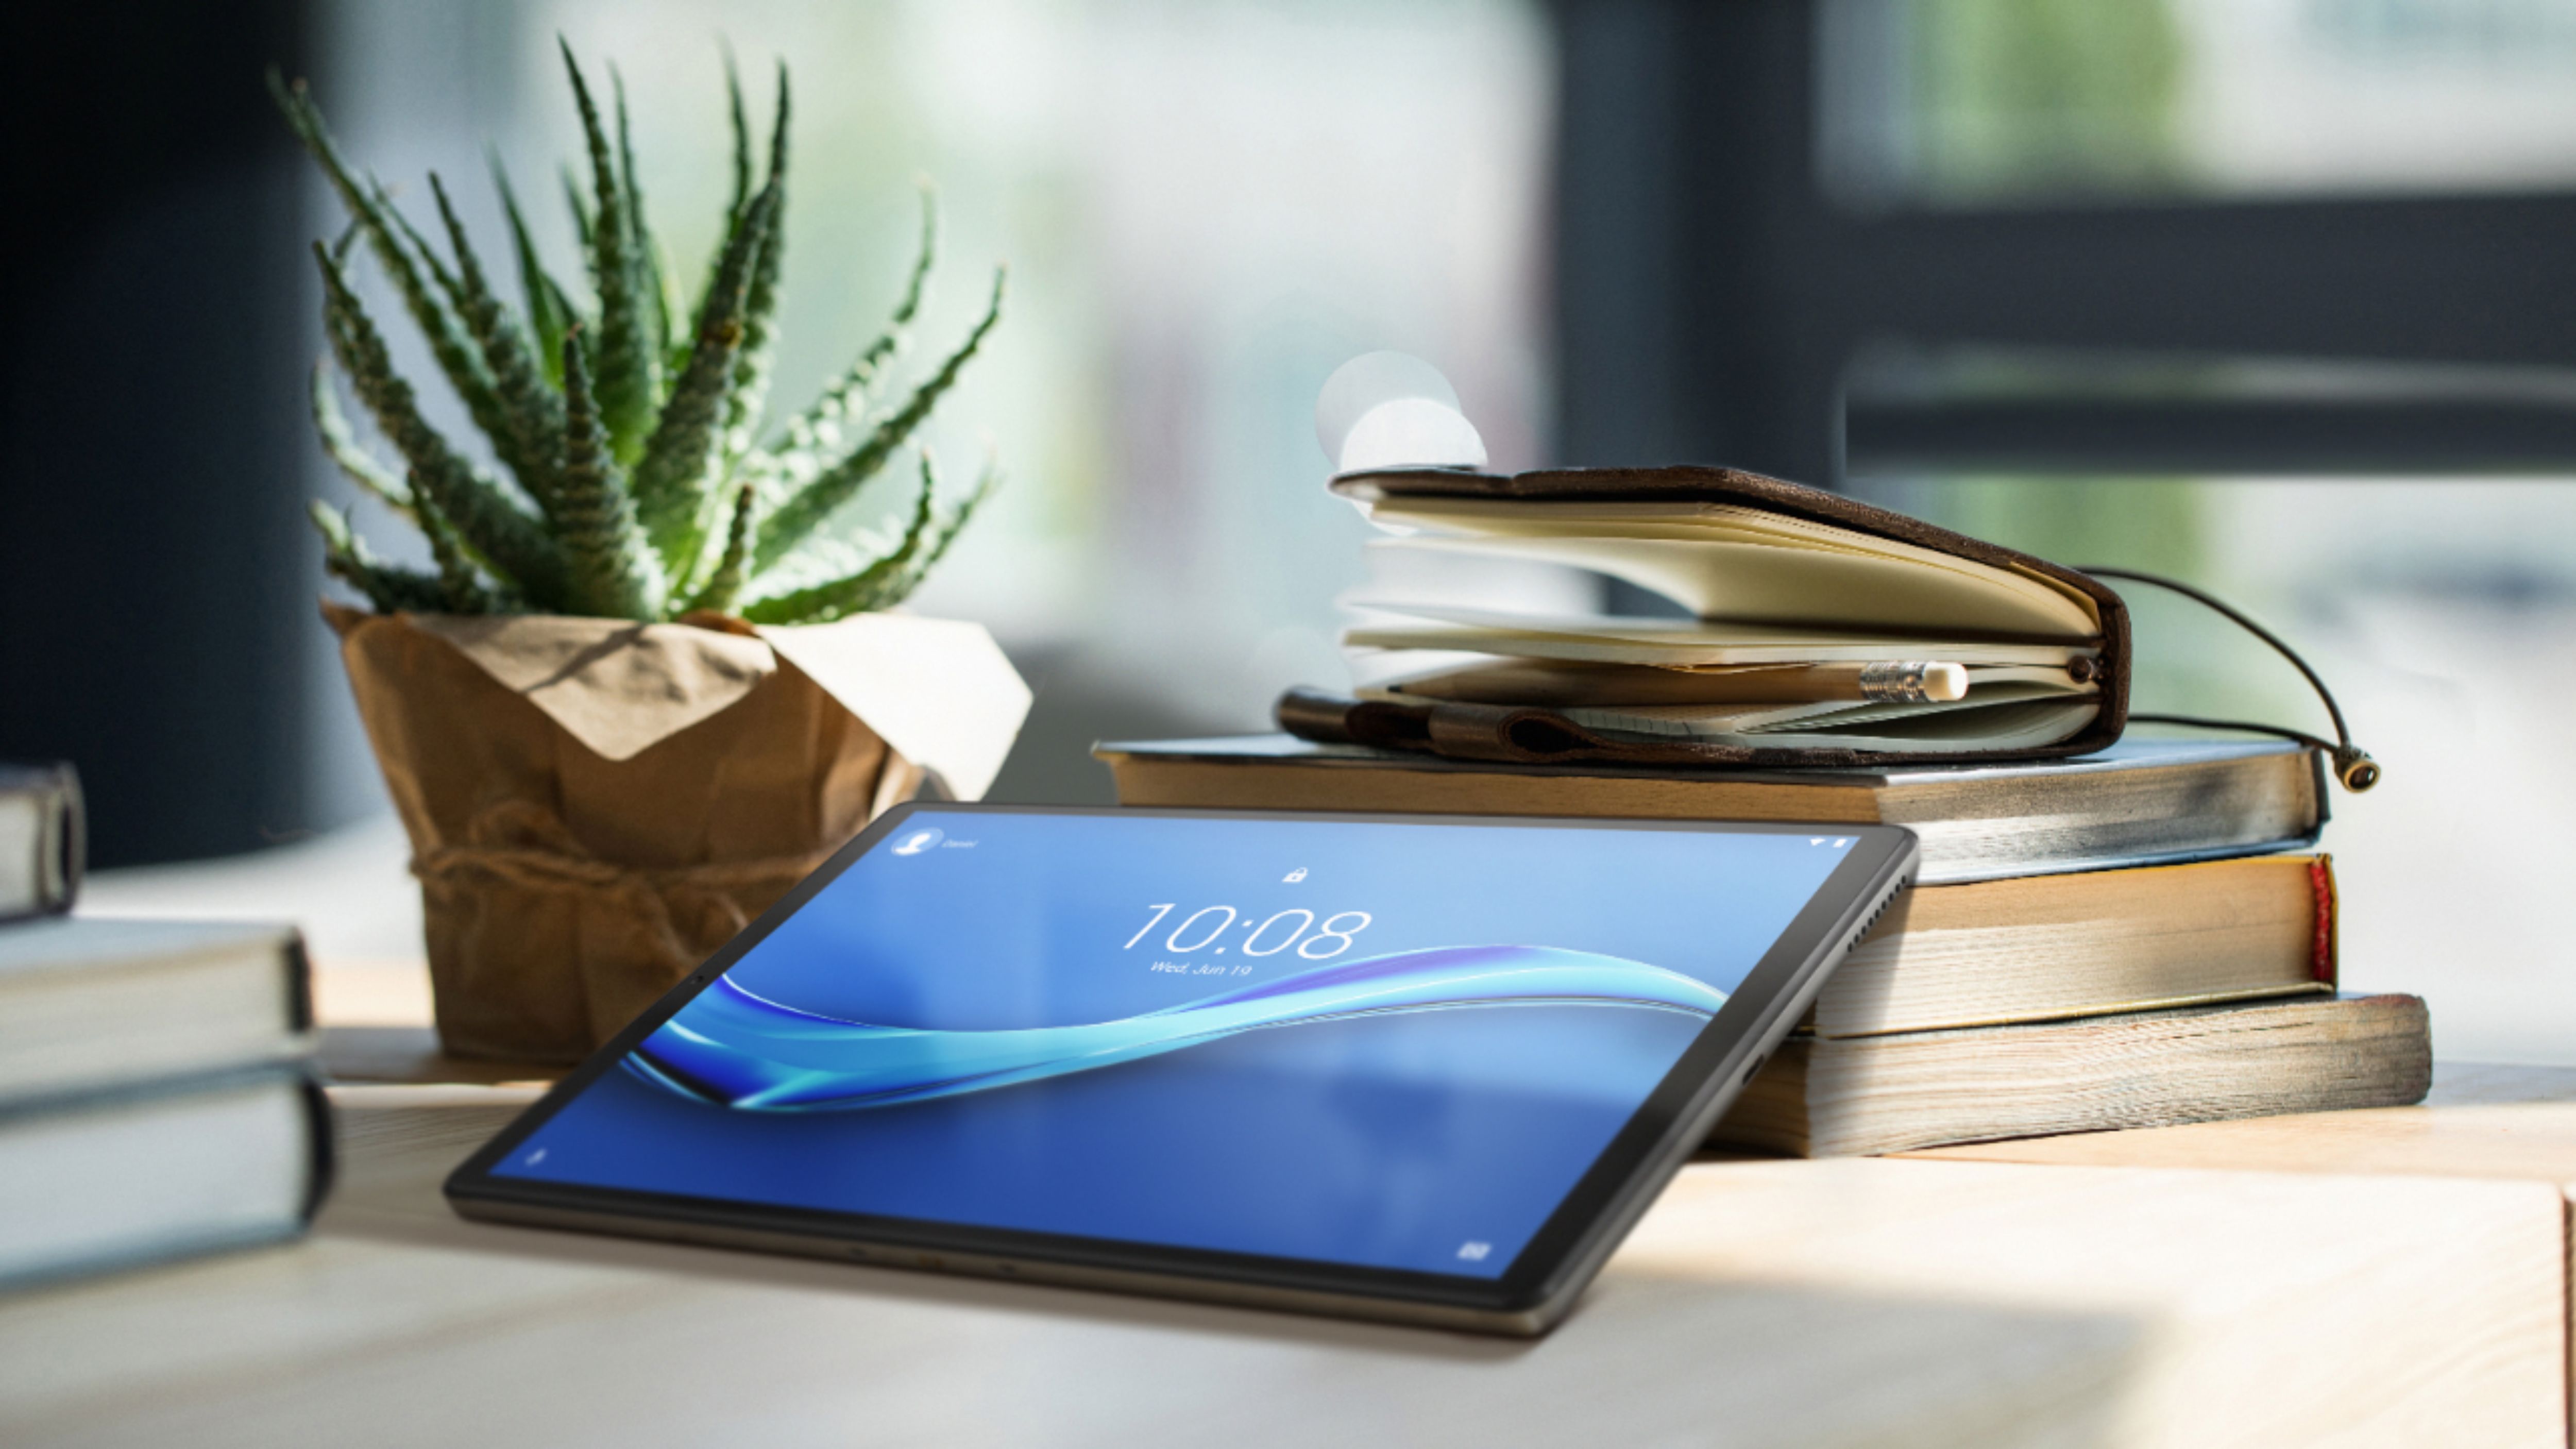 Lenovo Tab M10 FHD Plus (2nd Gen) - 2021 - Kids Mode Enablement - 10.3 -  Front 5MP & Rear 8MP Camera - 4GB Memory - 64GB Storage - Android 9 (Pie)  or